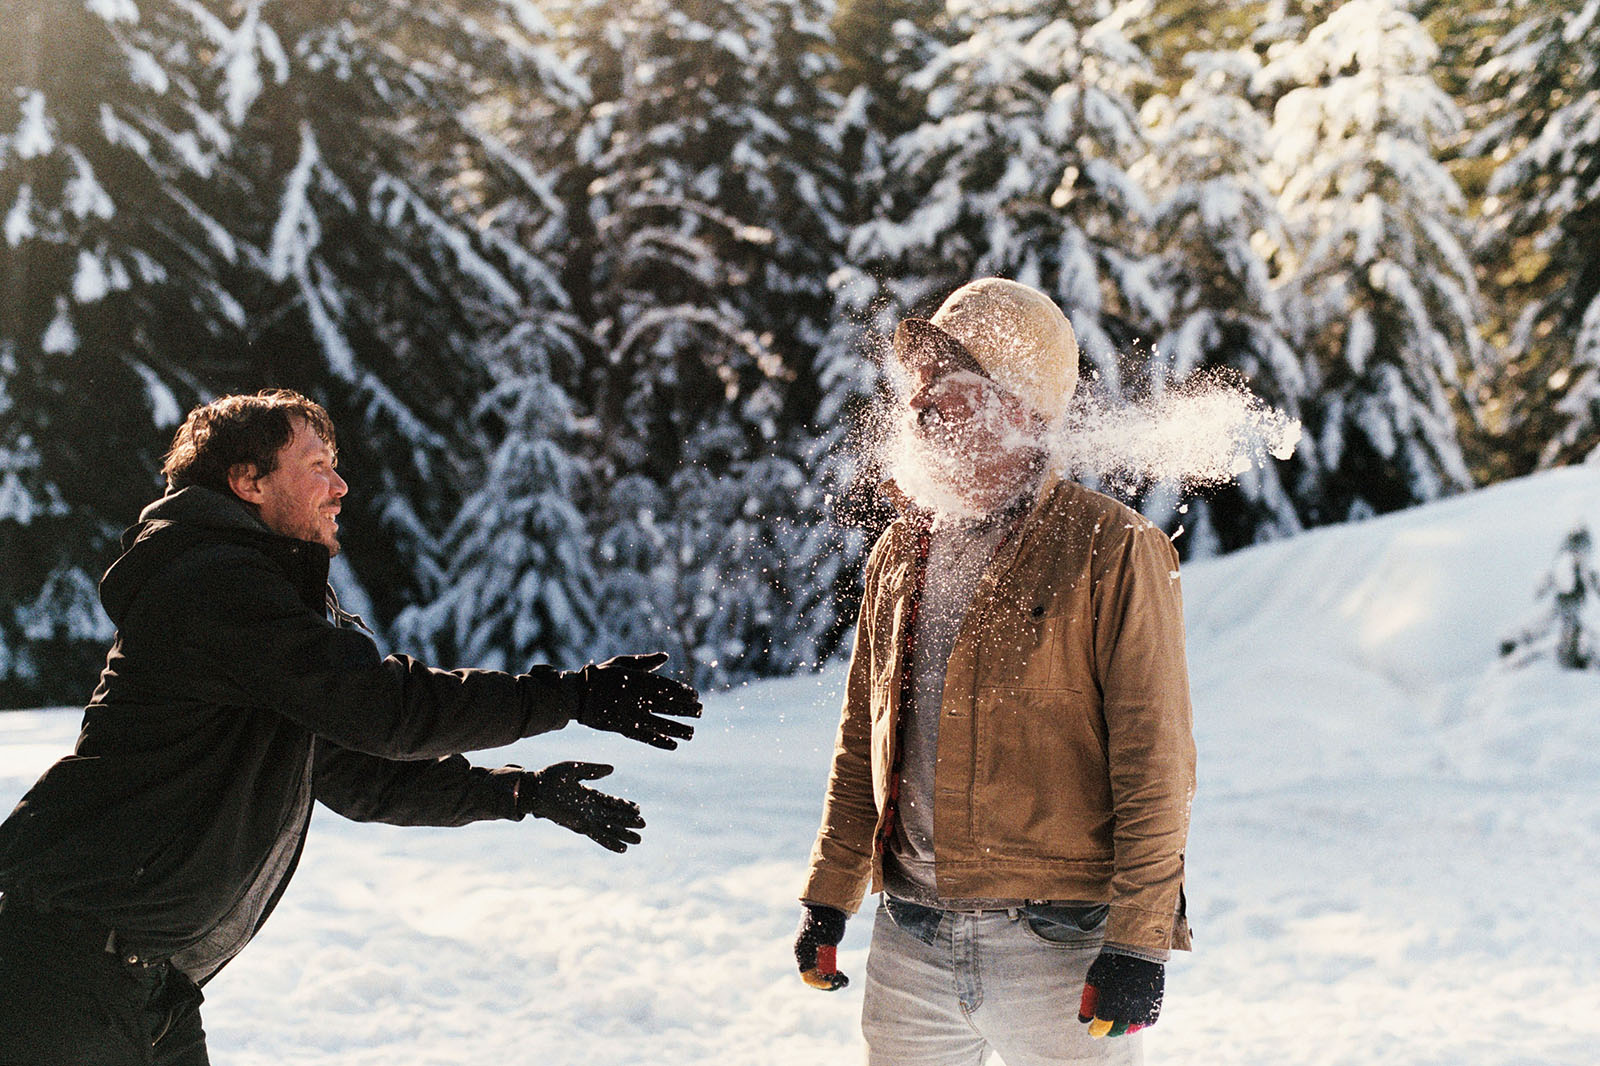 Amos throwing snow on Miles in Trout Lake, WA | Contax Aria